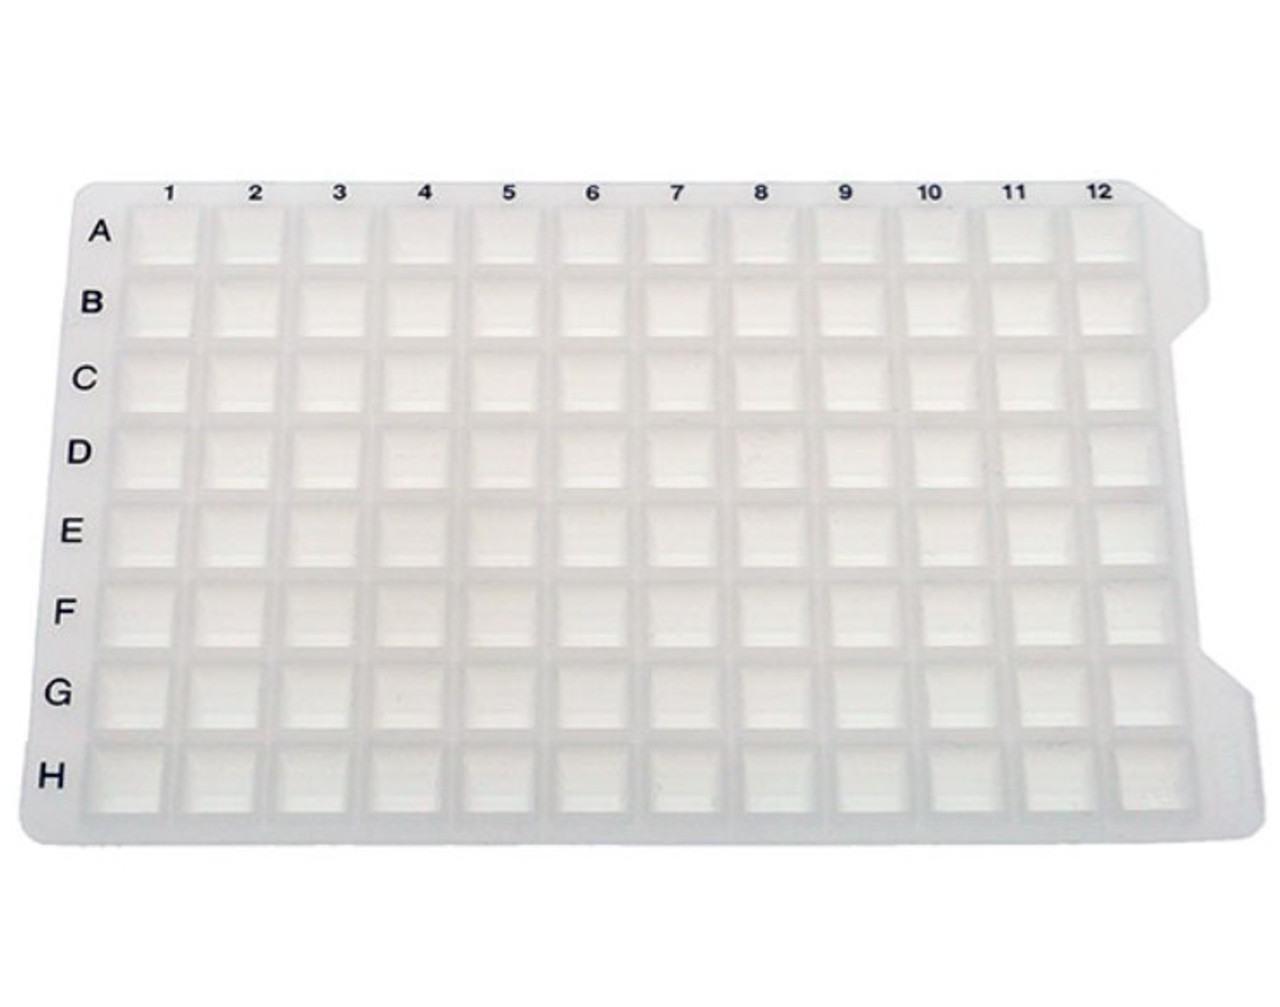 https://cdn11.bigcommerce.com/s-w9bdixgj/images/stencil/1280x1280/products/5483/11605/96_Well_Square_Silicone_Mat_For_Deep_Well_Plates_That_Are_Pre-Scored_For_Inserting_Tips_and_Needles_-_Lab_Automation_Supplies_-_Stellar_Scientific__46843.1666721781.jpg?c=2